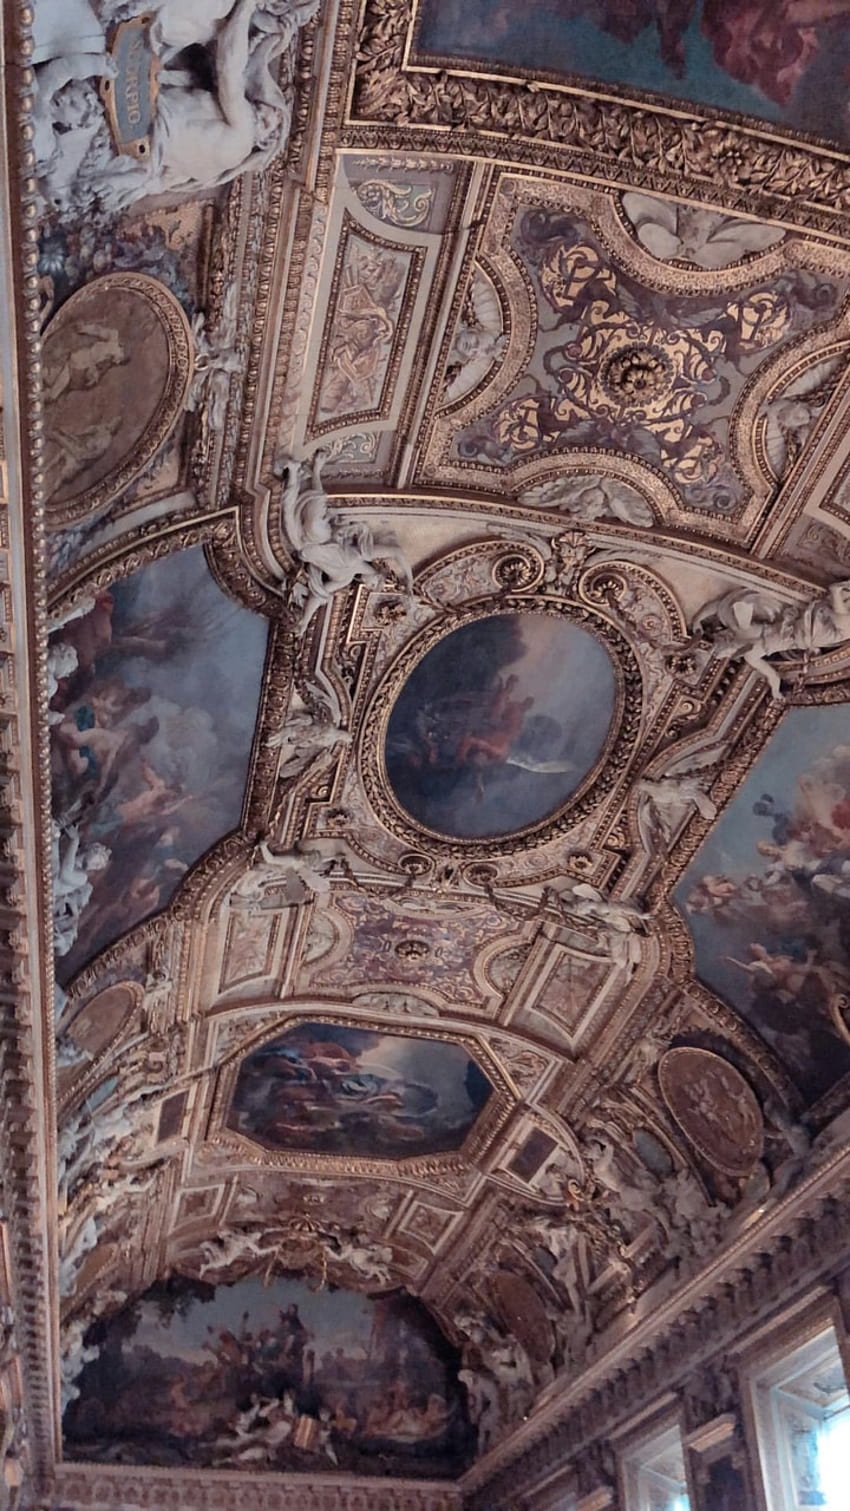 A room with paintings on the ceiling - Royalcore